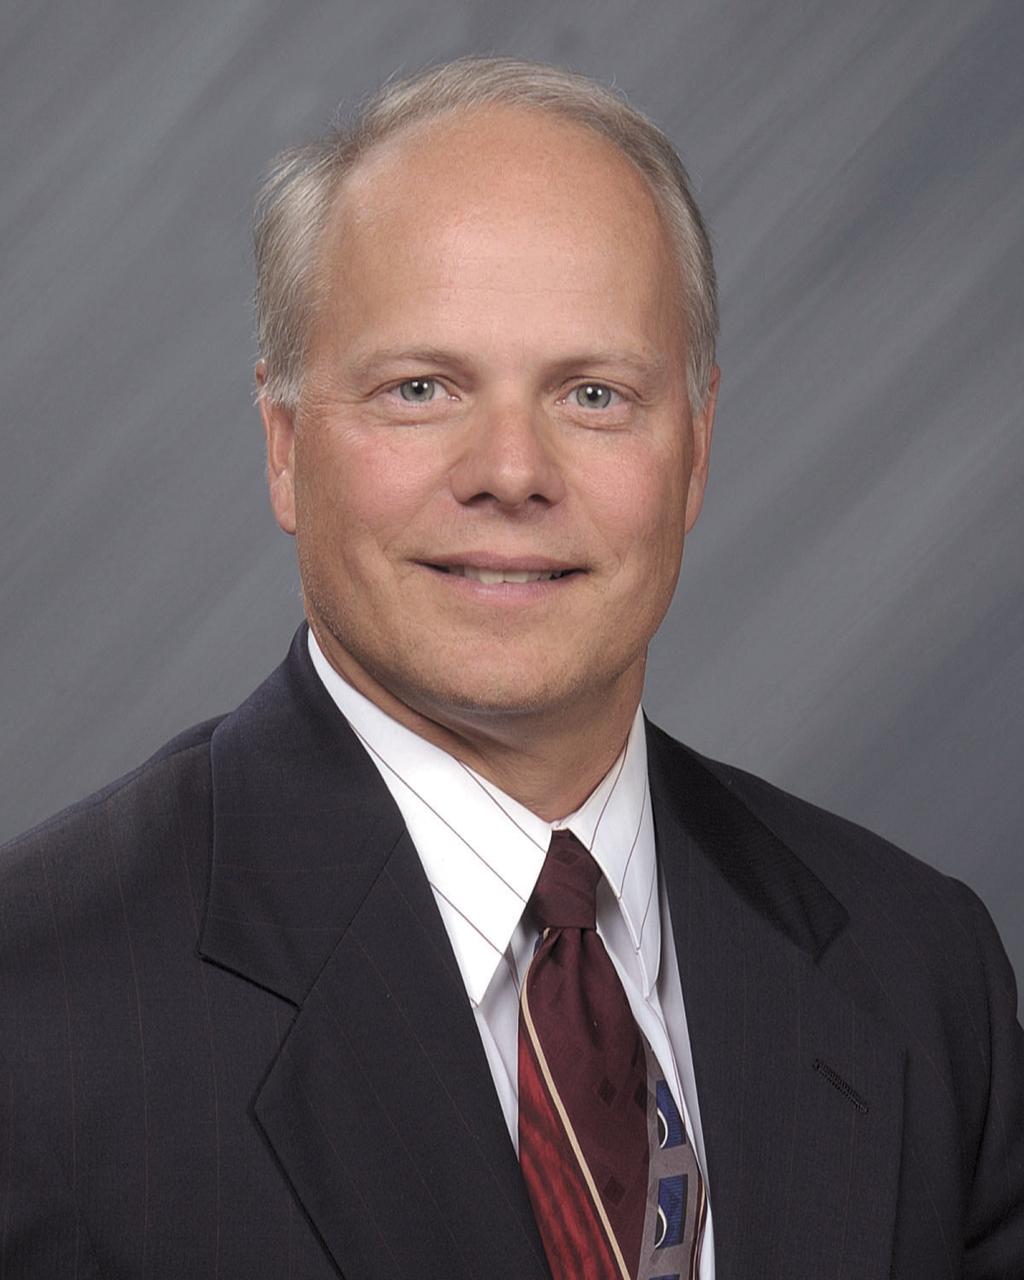 David A. Fisher, MD, Class of 1973 Dr. Fisher is an orthopaedic surgeon currently practicing in Indianapolis, IN.